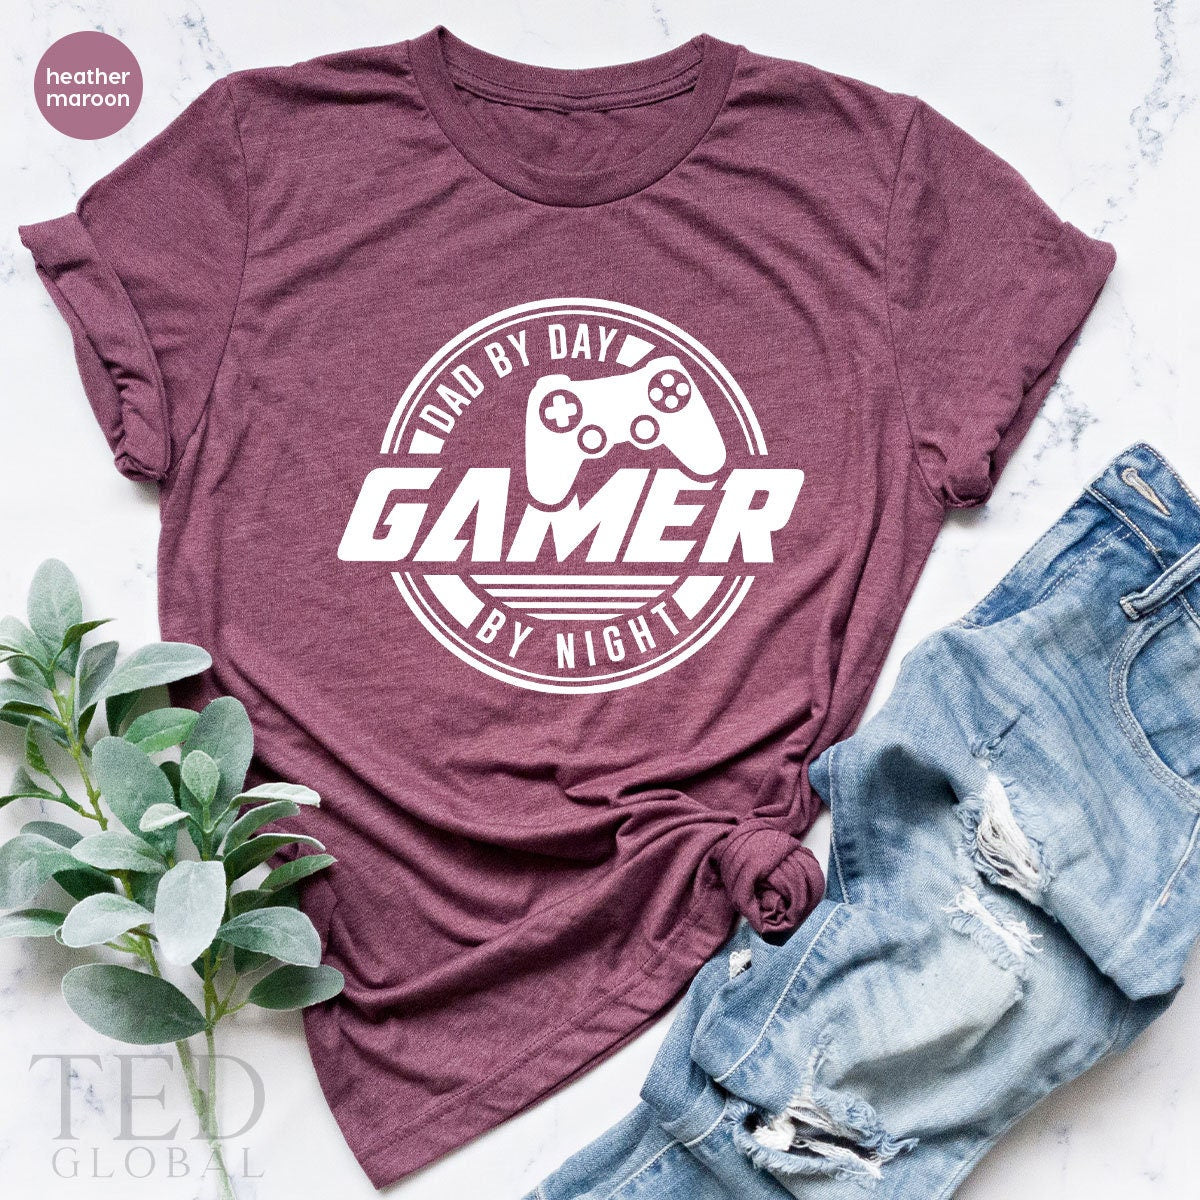 Gamer Dad Shirt, Funny Gamer Father Shirt, Video Game TShirt, Game Lover Daddy T Shirt - Fastdeliverytees.com